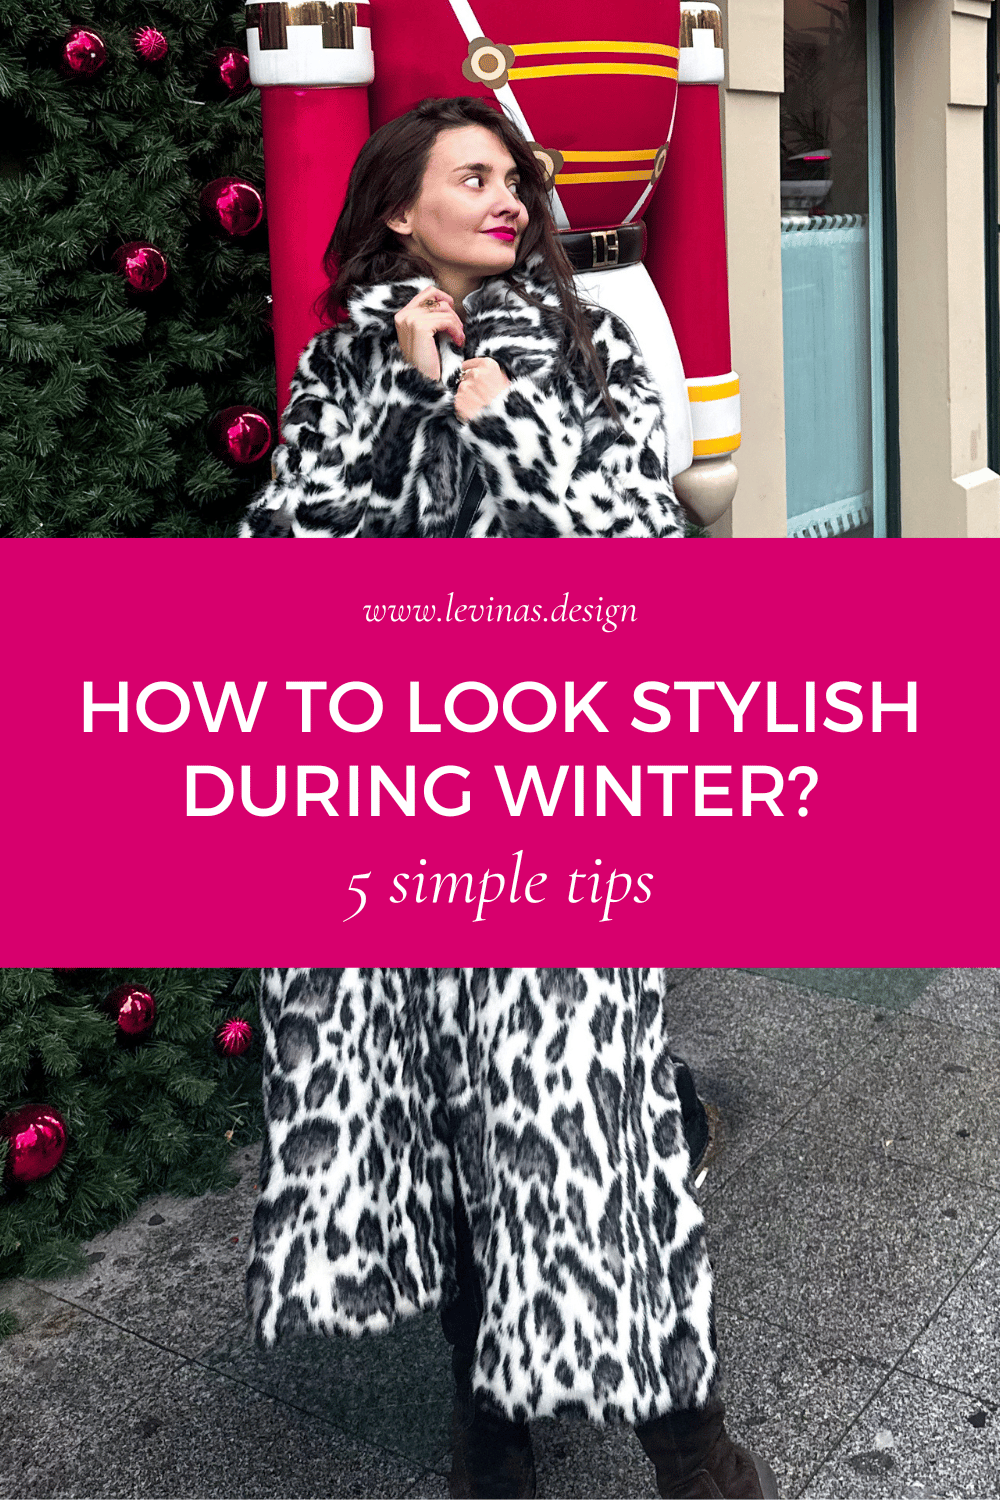 Tips for styling winter going out outfits! ❄️ #fashion #winterfashion